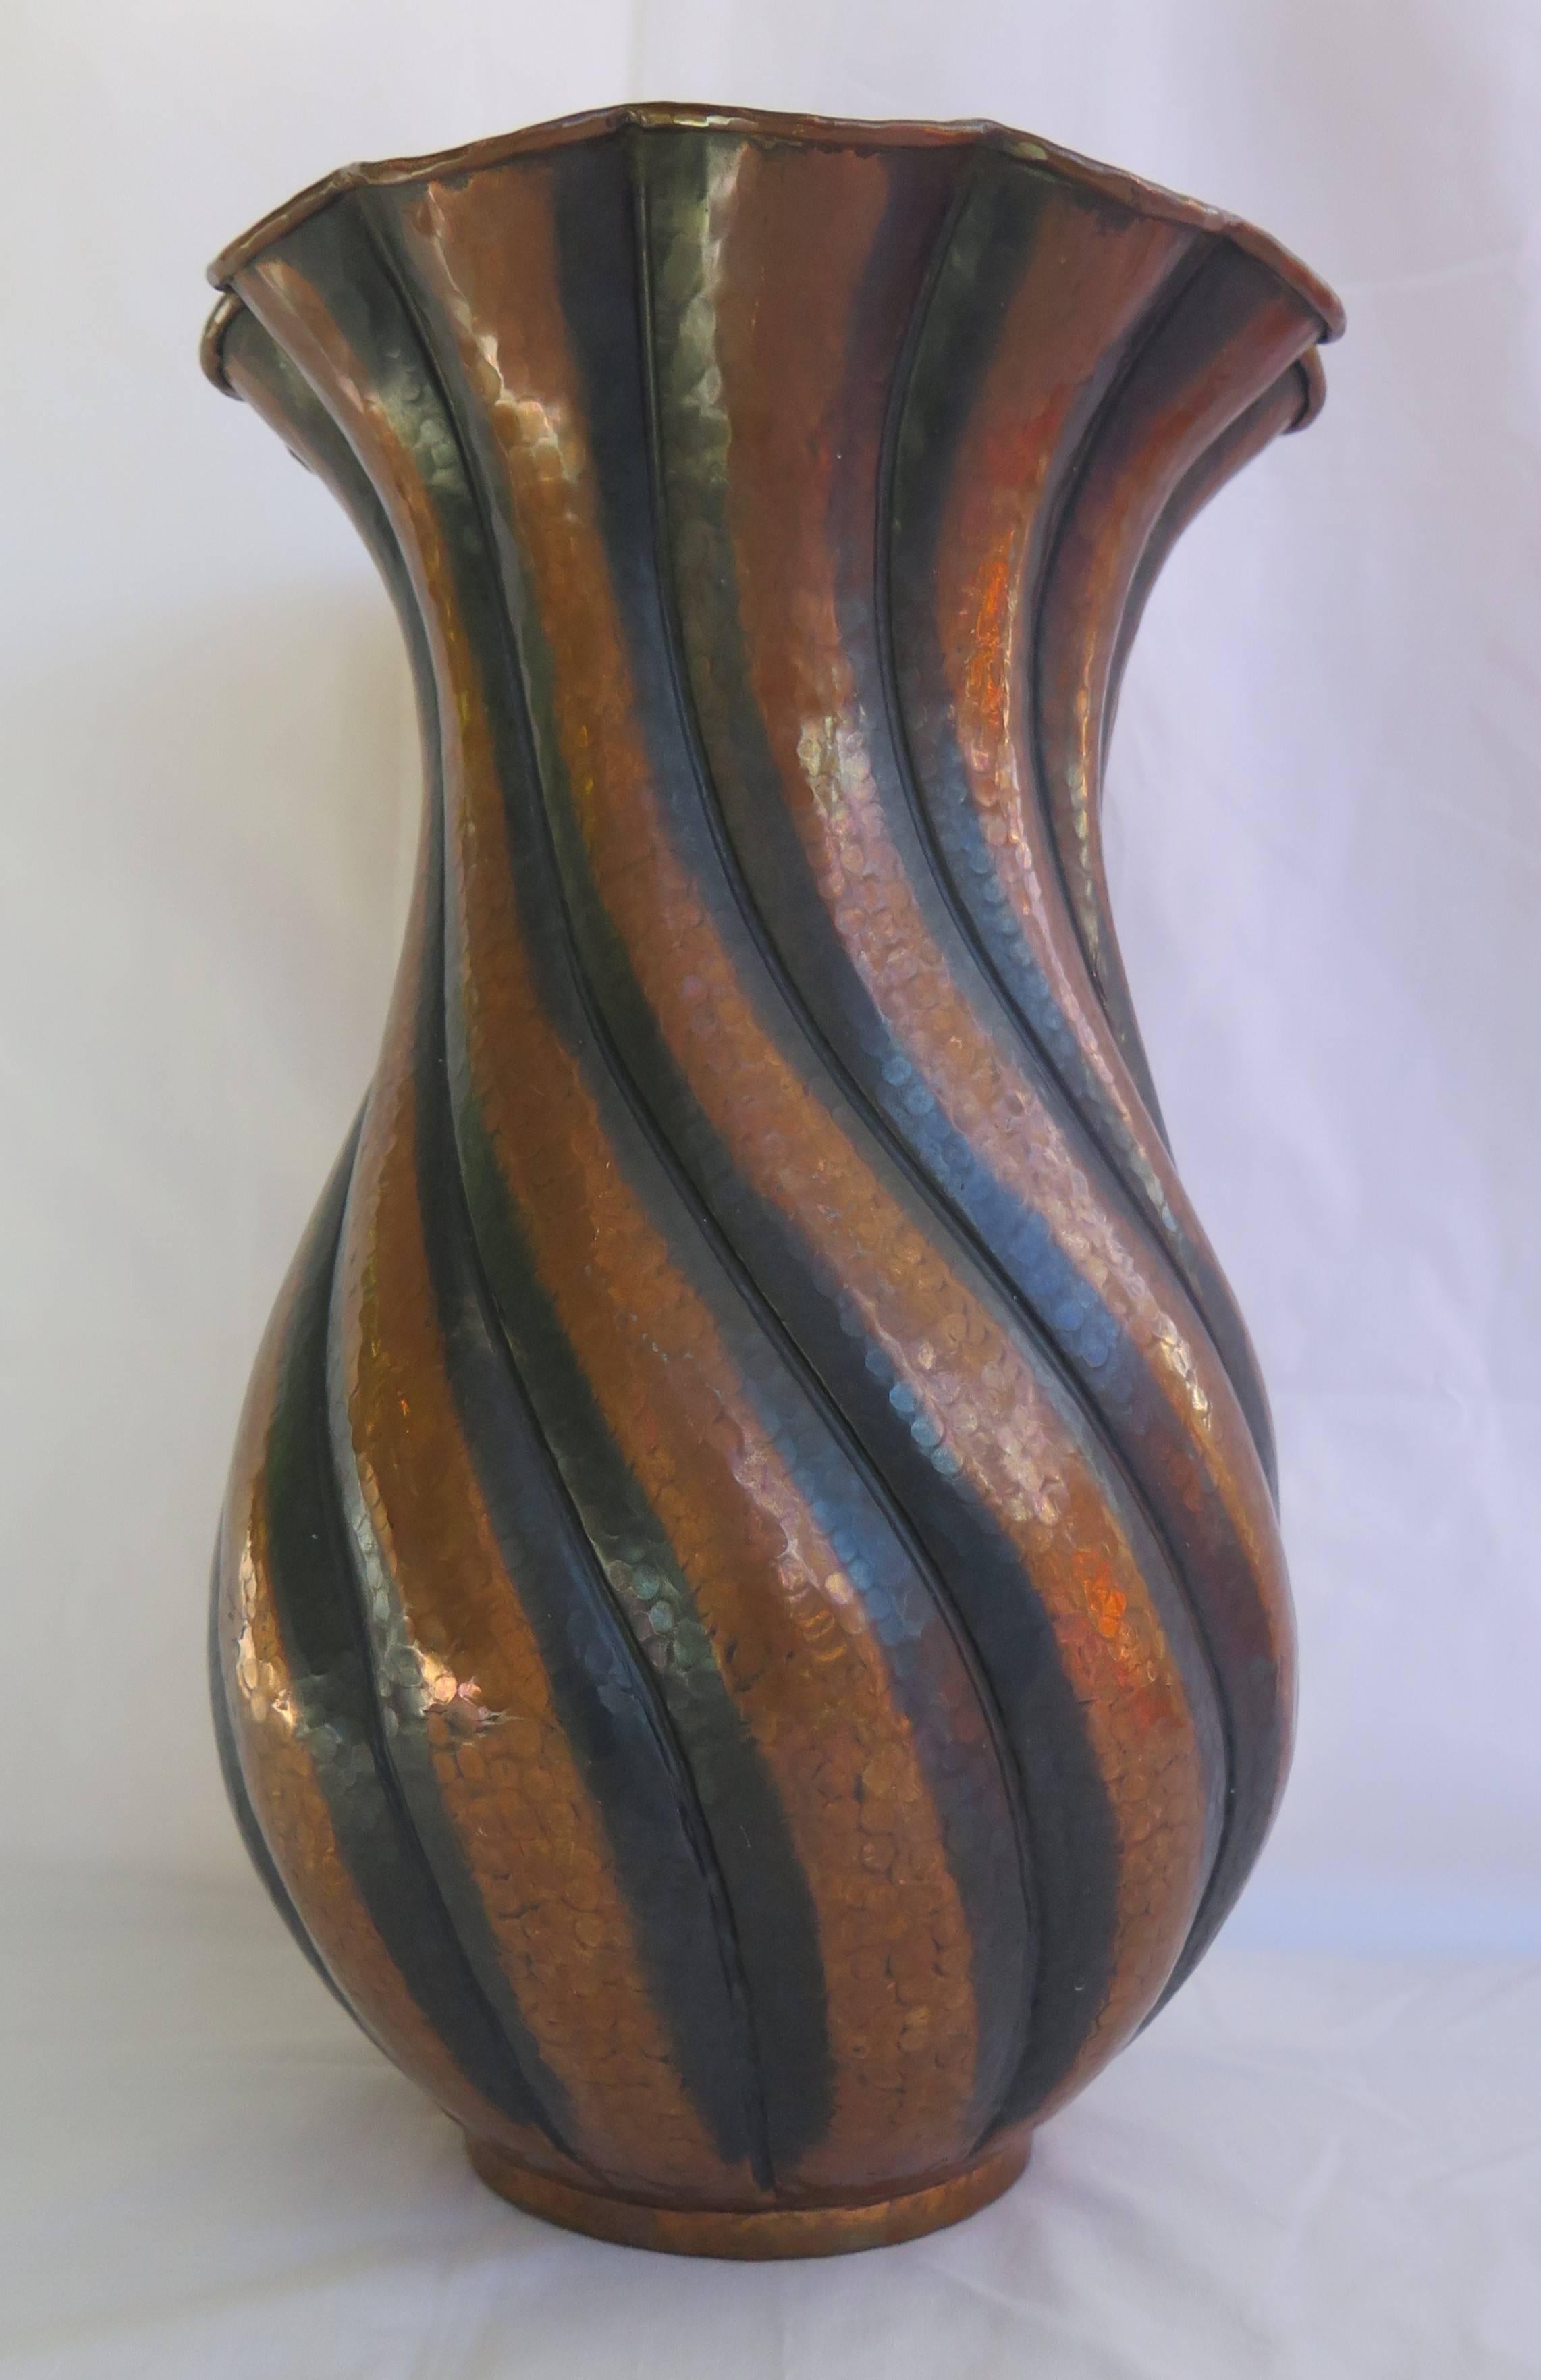 This is an excellent example of a large copper vase by the renowned Italian designer and metalworker, Egidio Casagrande.

The vase is hand worked in hammered copper and has a shallow foot below a baluster shape with vertical twist fluting, leading